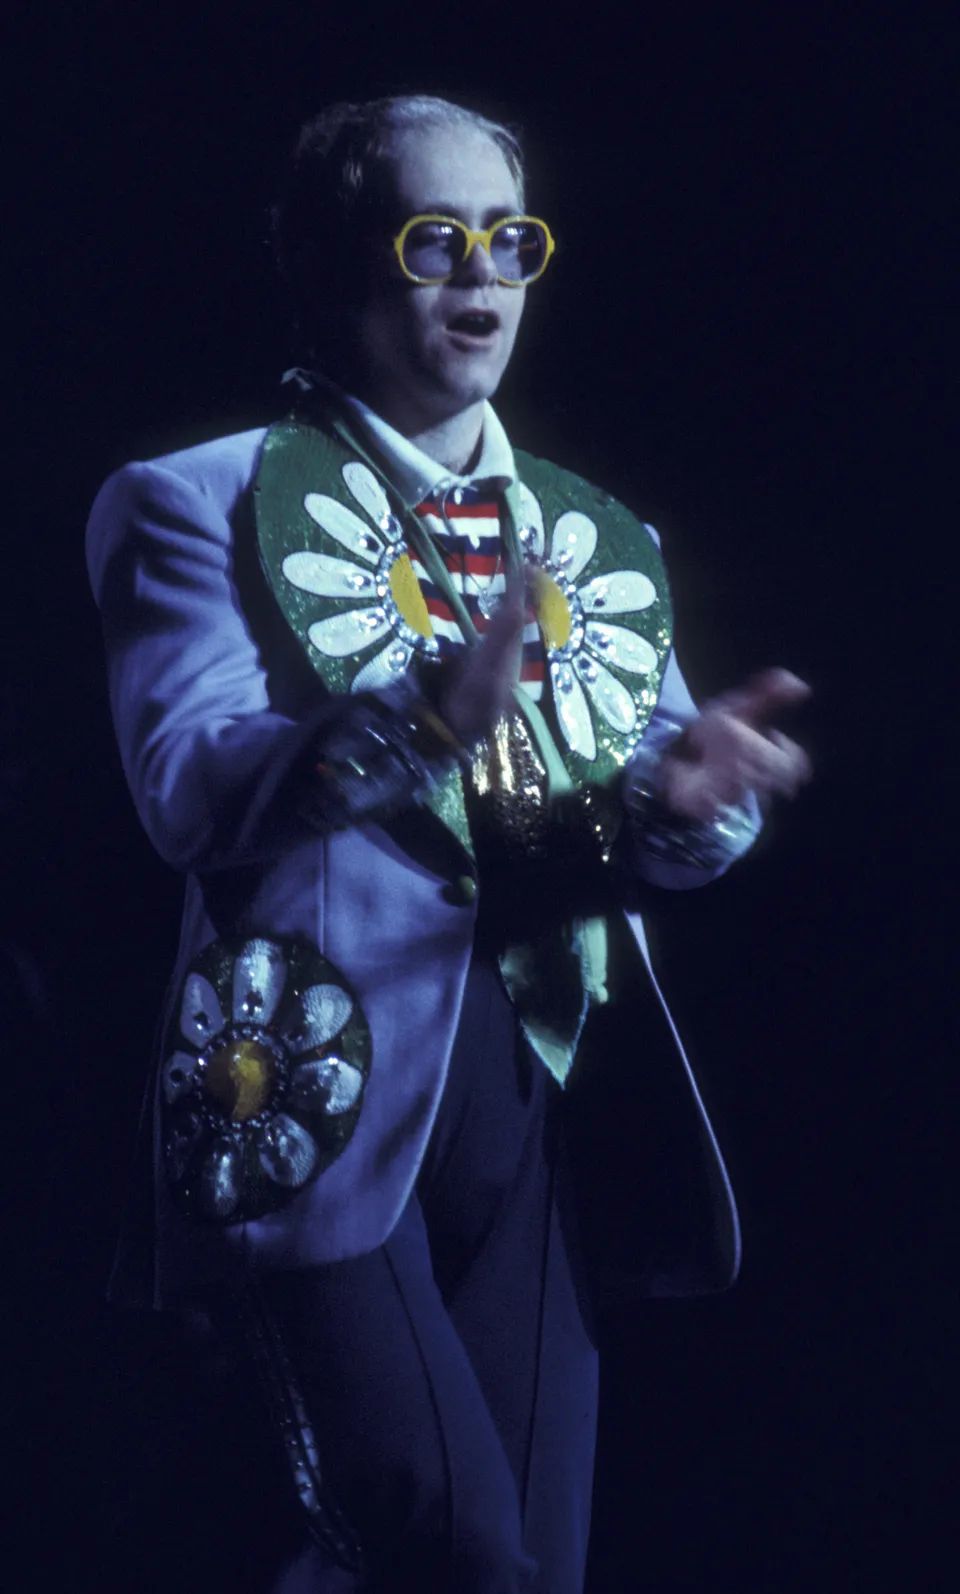 Elton John wearing a suit emblazoned with named stars, 1975